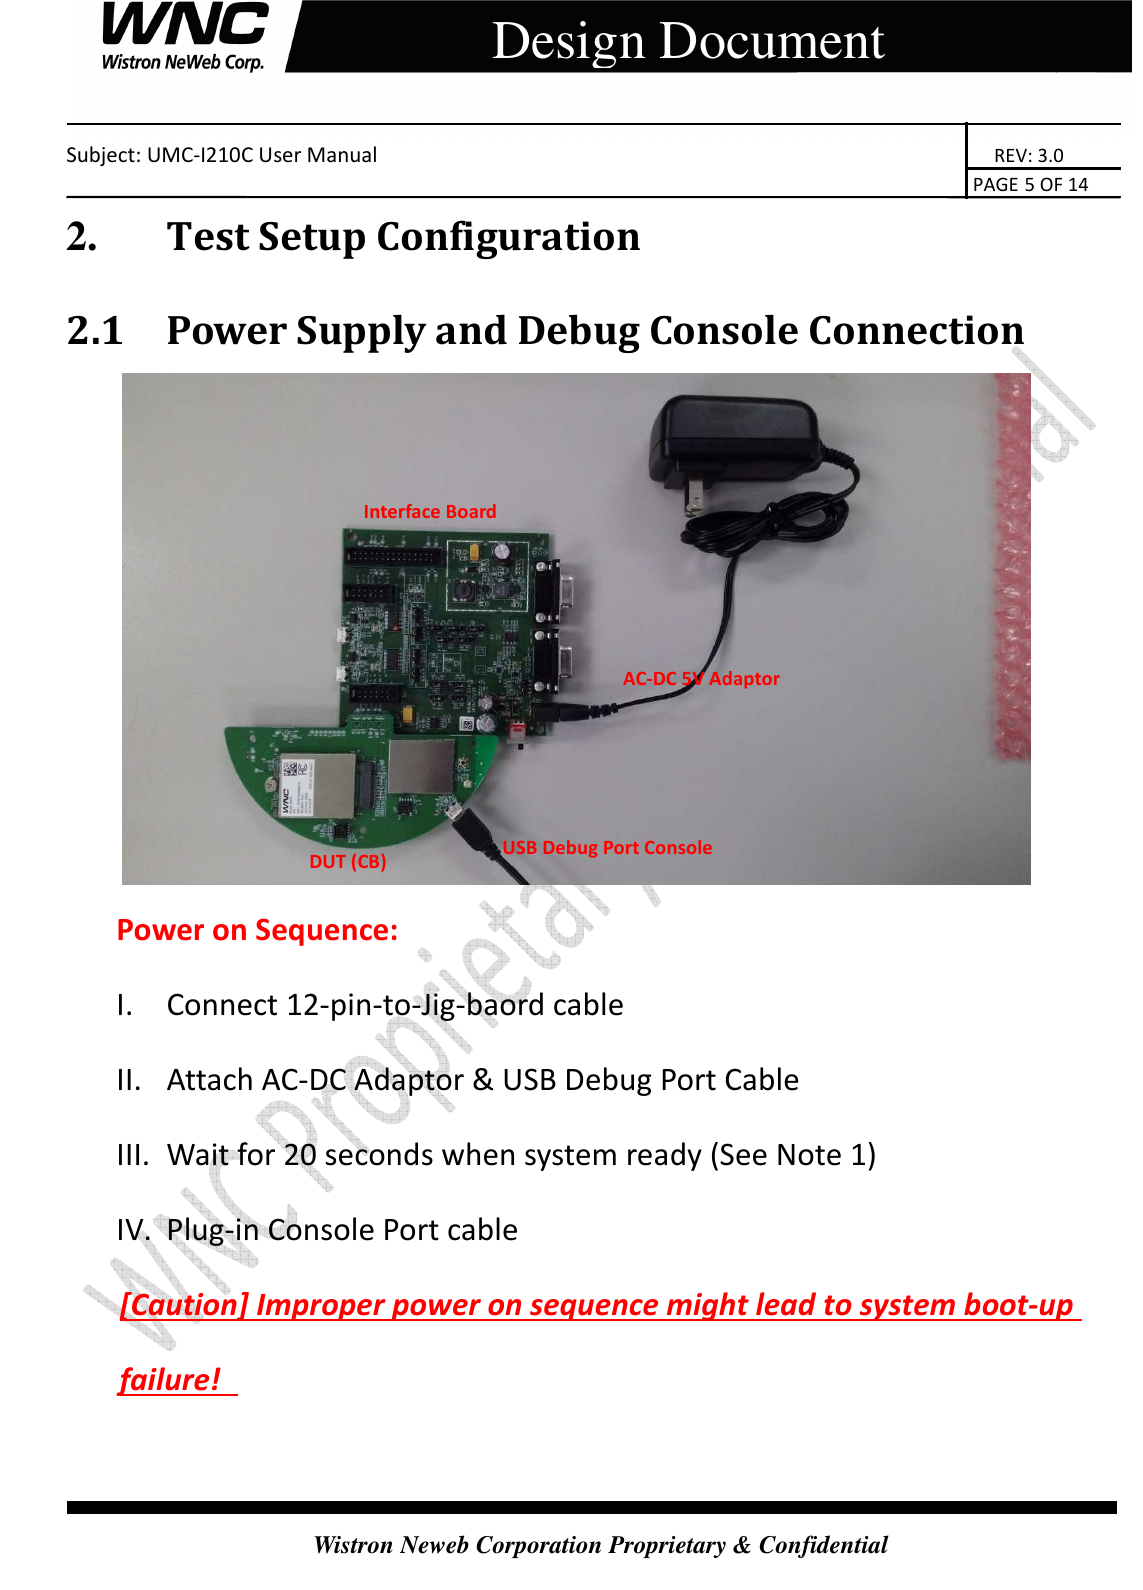    Subject: UMC-I210C User Manual                                                                       REV: 3.0                                                                                                                                                                               PAGE 5 OF 14  Wistron Neweb Corporation Proprietary &amp; Confidential     Design Document 2.       Test Setup Configuration 2.1 Power Supply and Debug Console Connection  Power on Sequence: I. Connect 12-pin-to-Jig-baord cable II. Attach AC-DC Adaptor &amp; USB Debug Port Cable III. Wait for 20 seconds when system ready (See Note 1) IV. Plug-in Console Port cable   [Caution] Improper power on sequence might lead to system boot-up failure!   AC-DC 5V Adaptor Interface Board  DUT (CB) USB Debug Port Console 